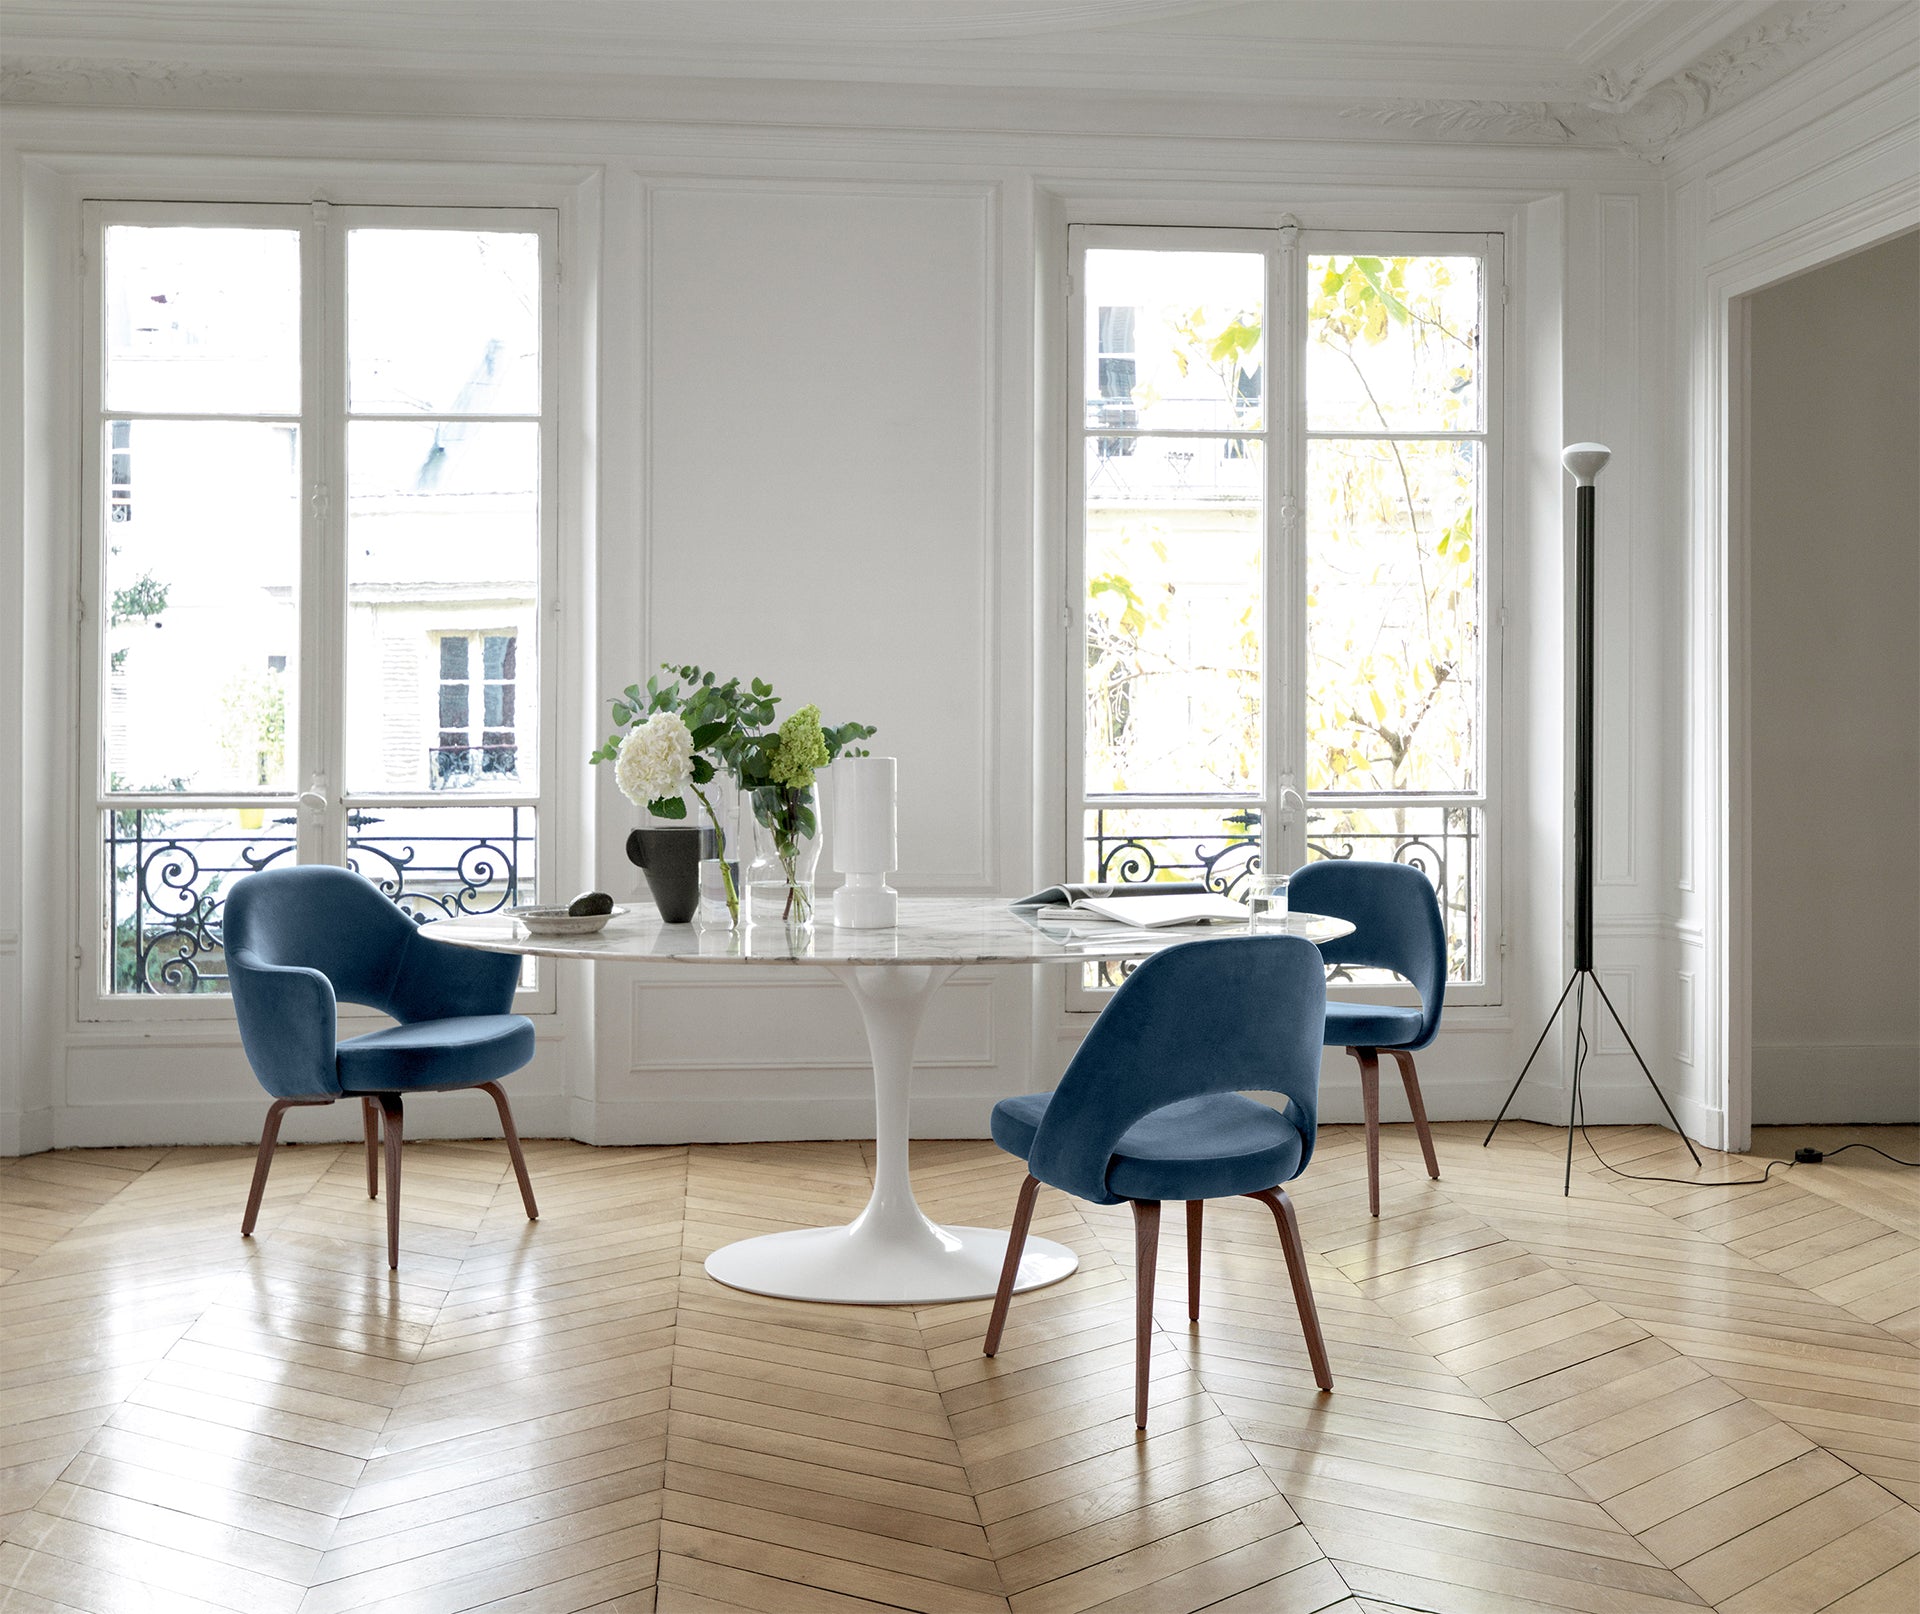 Saarinen Conference Chairs paired with Saarinen Oval Tulip Table by Knoll